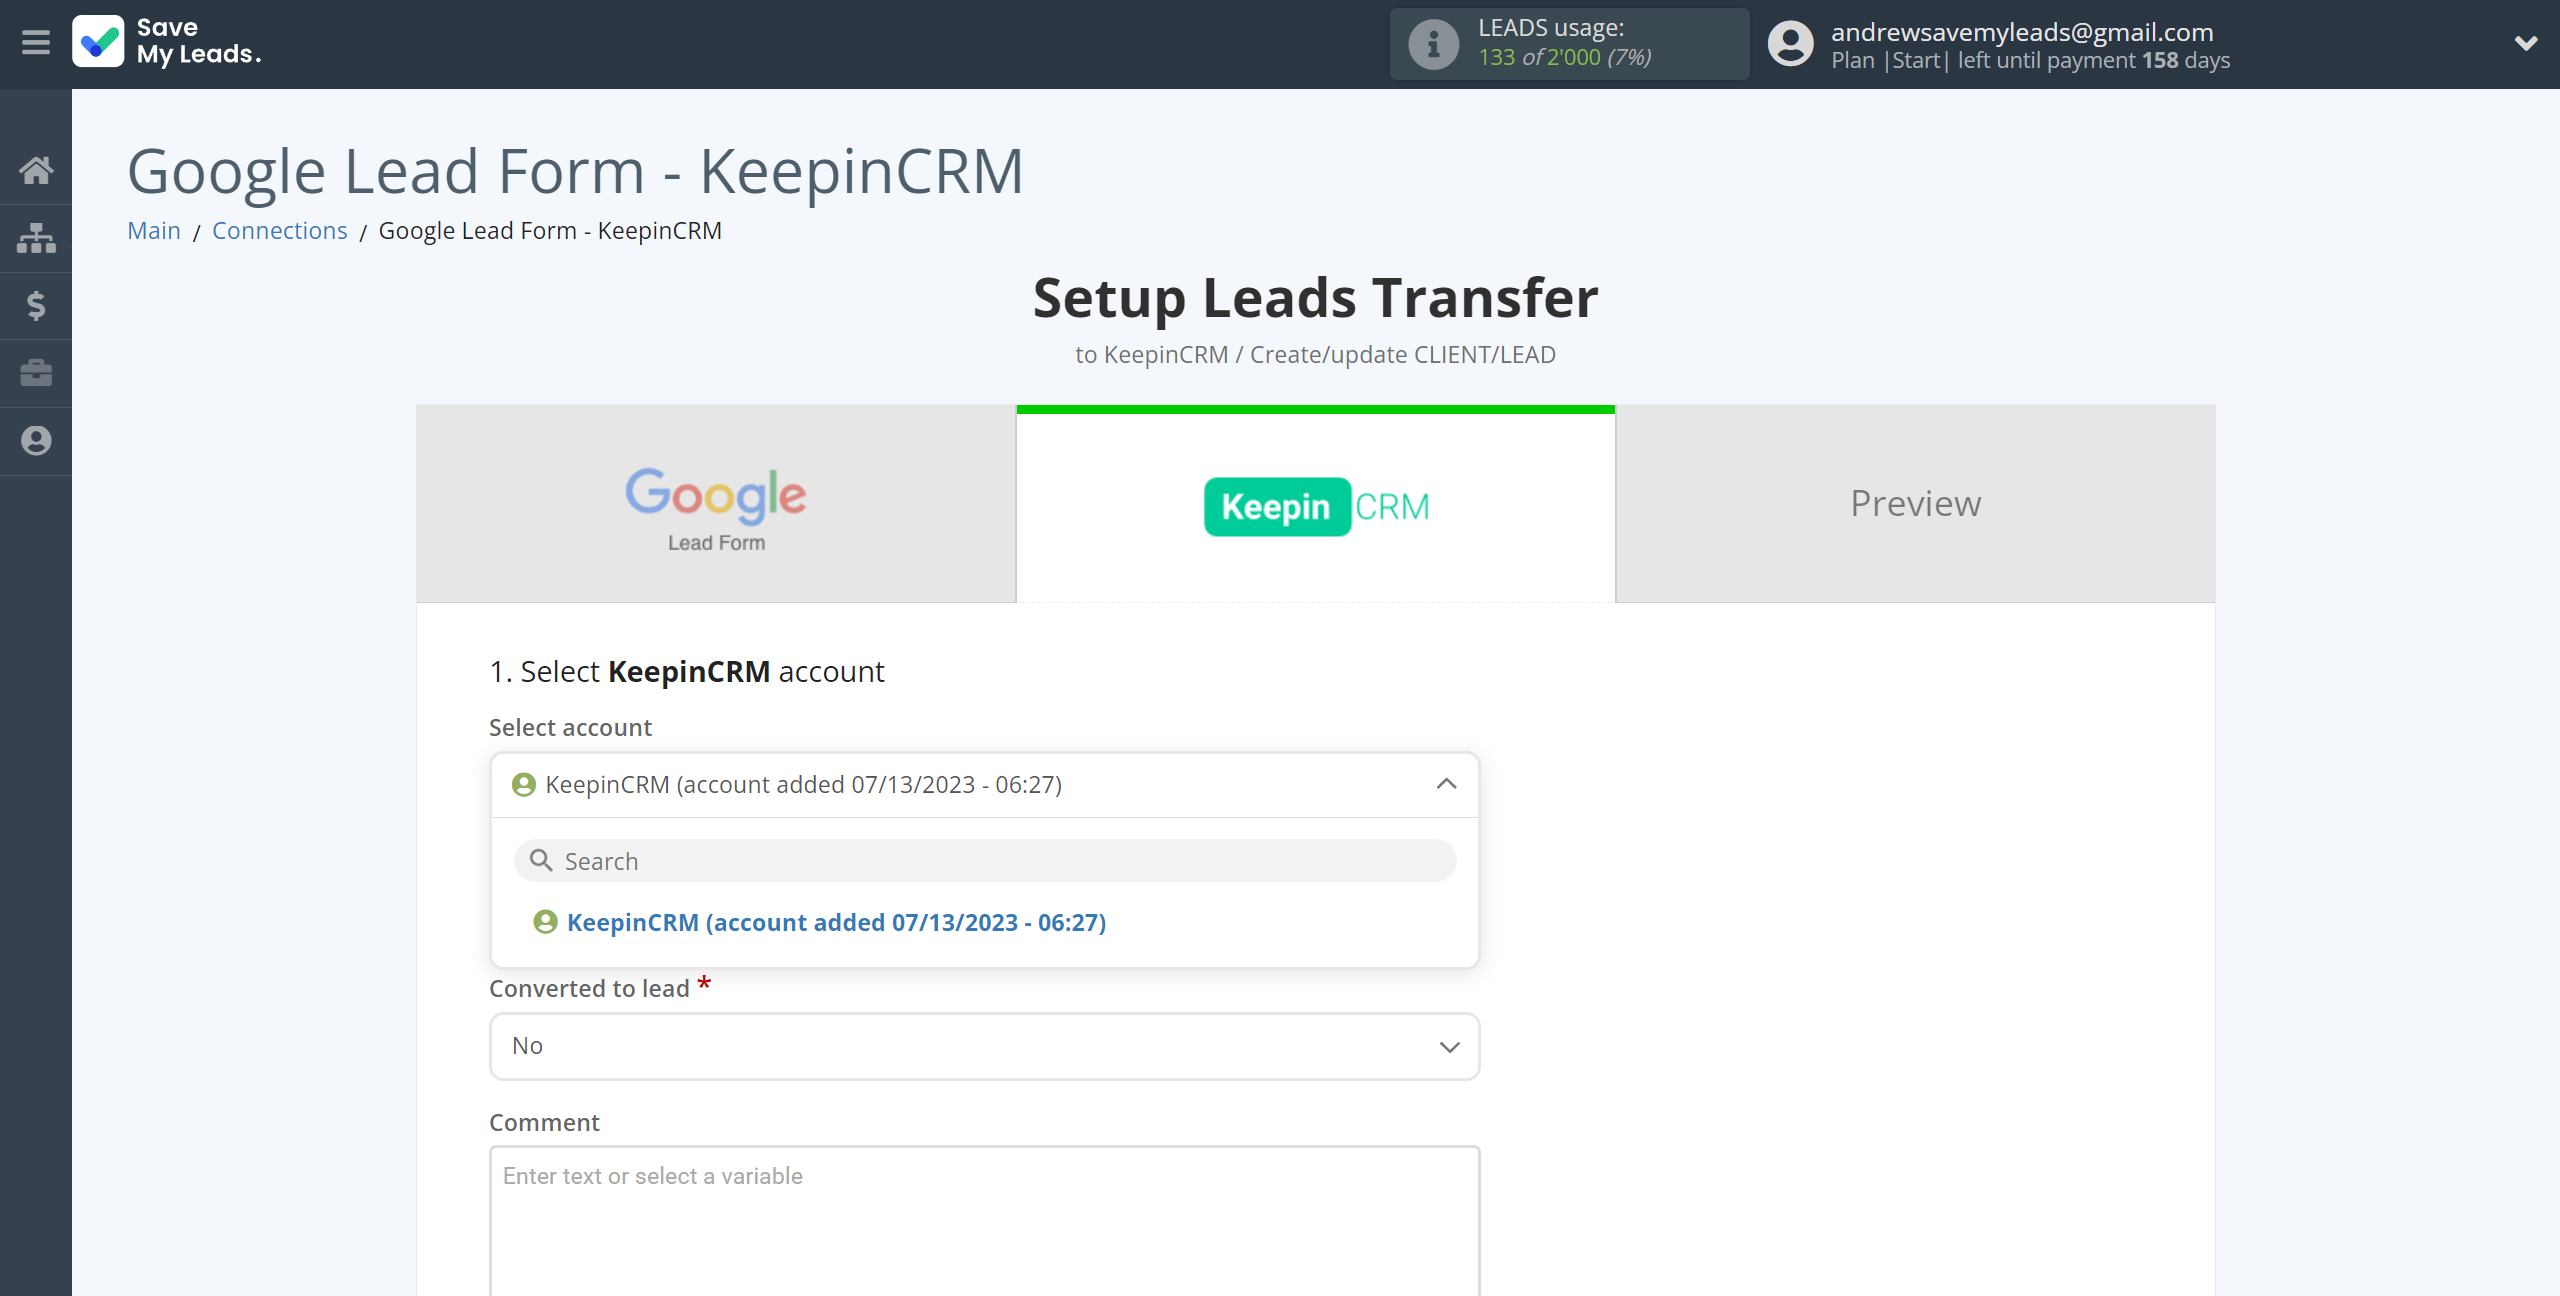 How to Connect Google Lead Form with KeepinCRM Create/update Client/Lead | Data Destination account selection